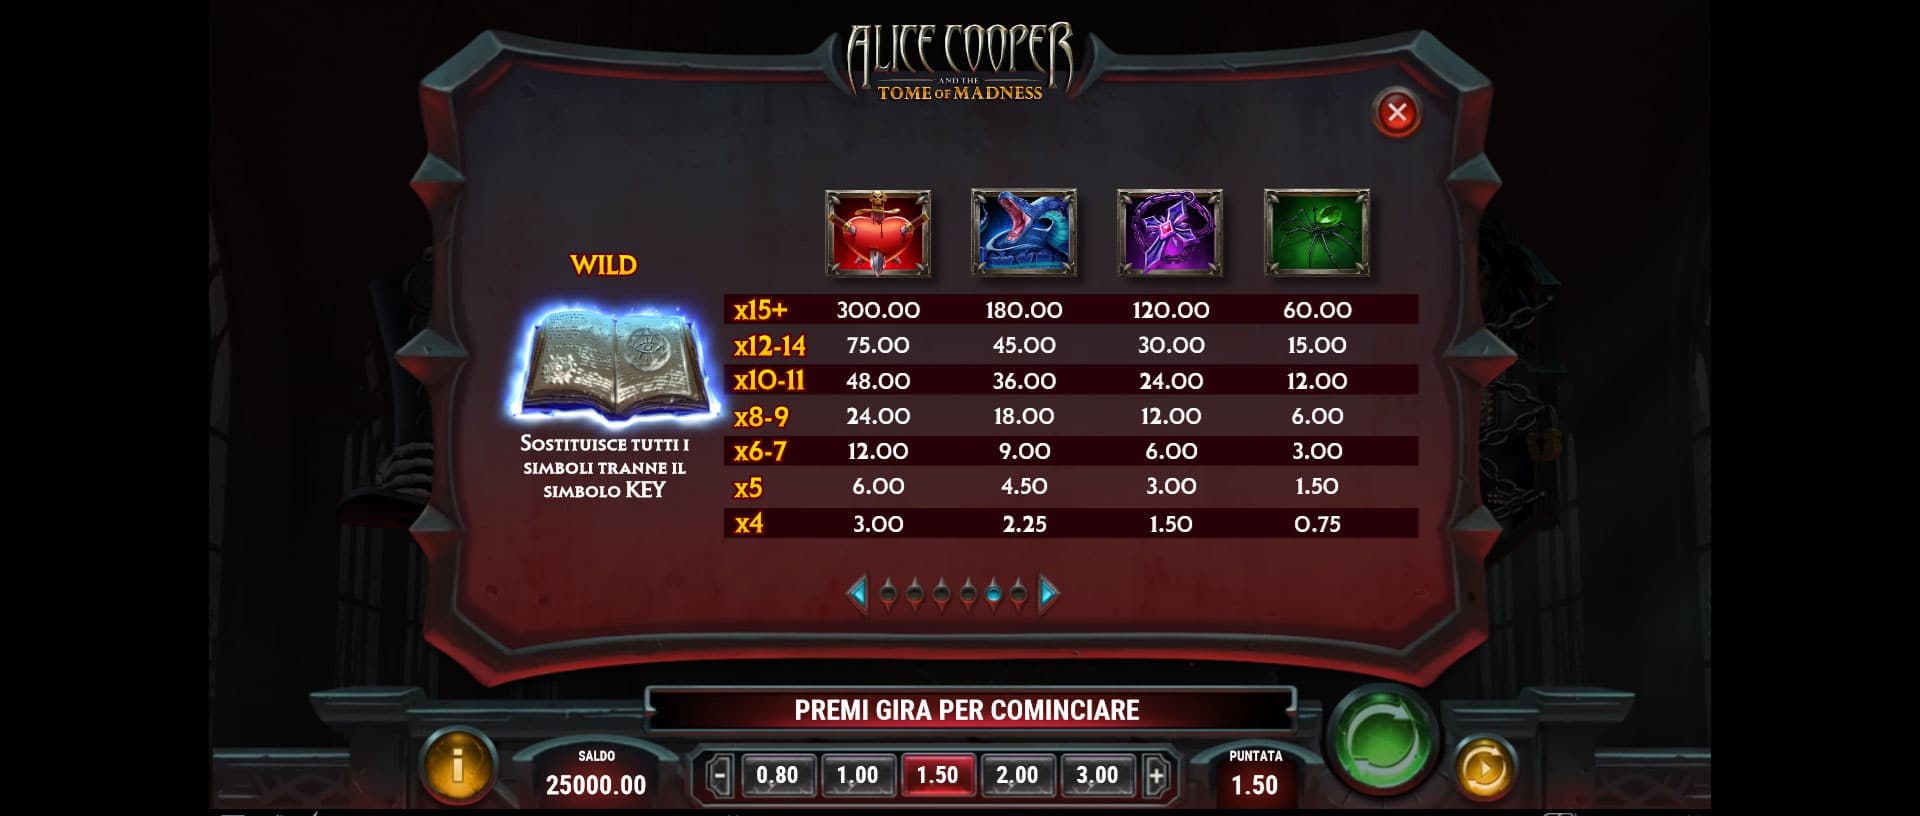 paytable della slot online alice cooper and the tome of madness